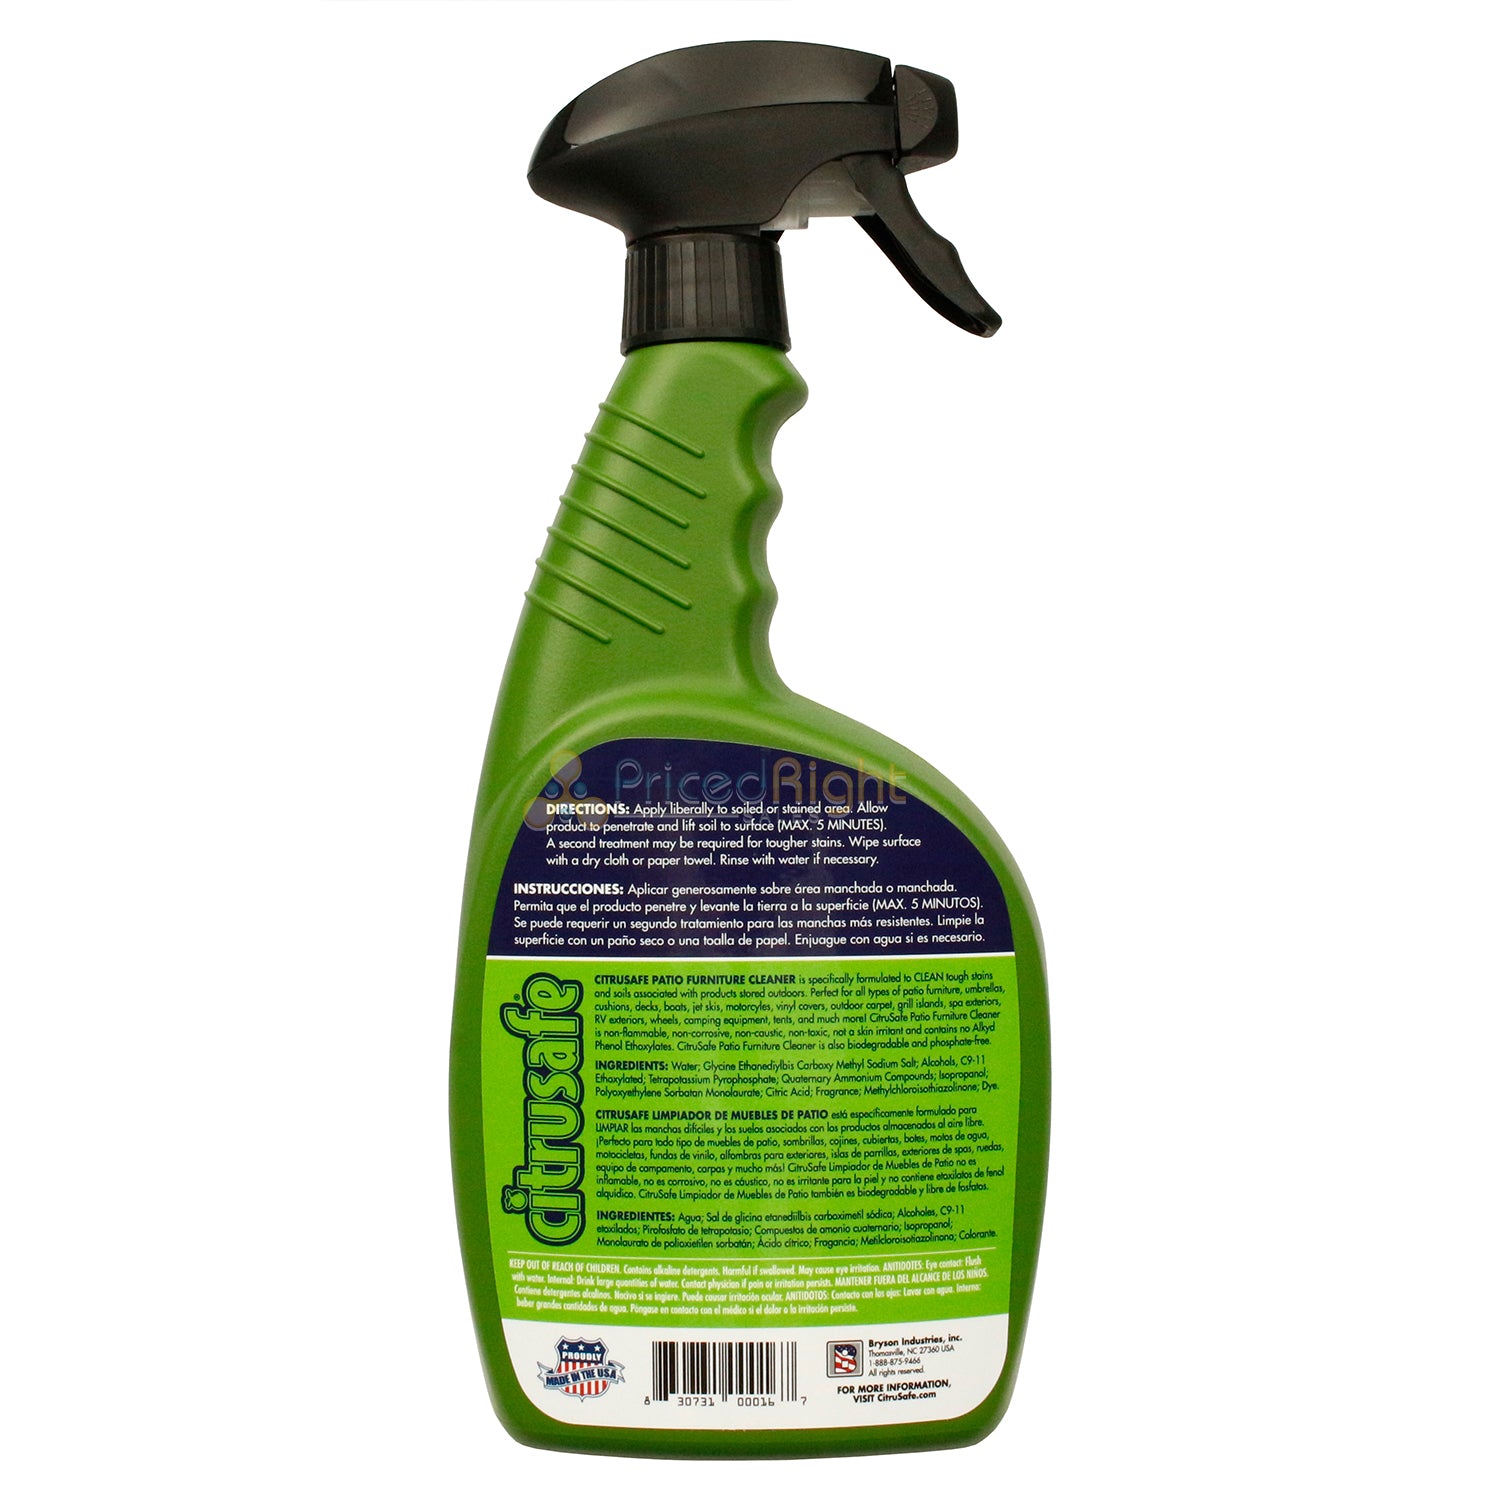 Citrusafe Eco-Friendly Outdoor Patio Furniture & Accessories Cleaner 24 fl oz